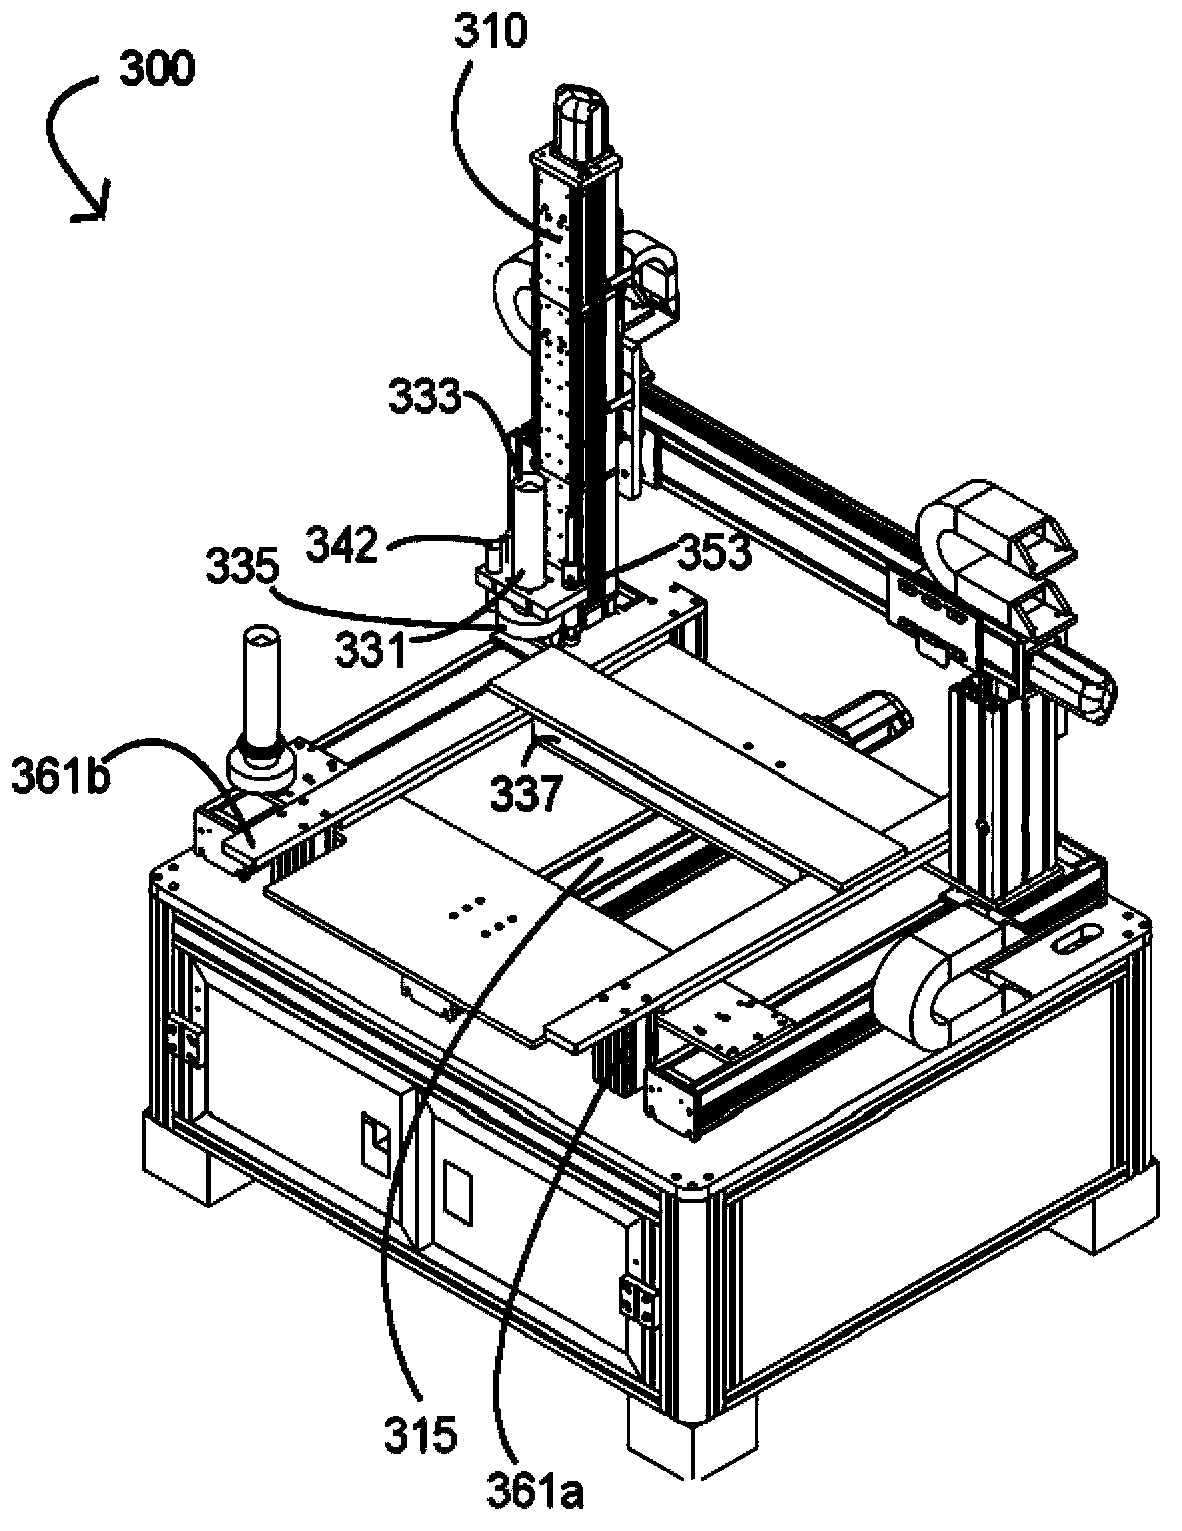 System and method for cleaning spinneret orifices of spinneret plate